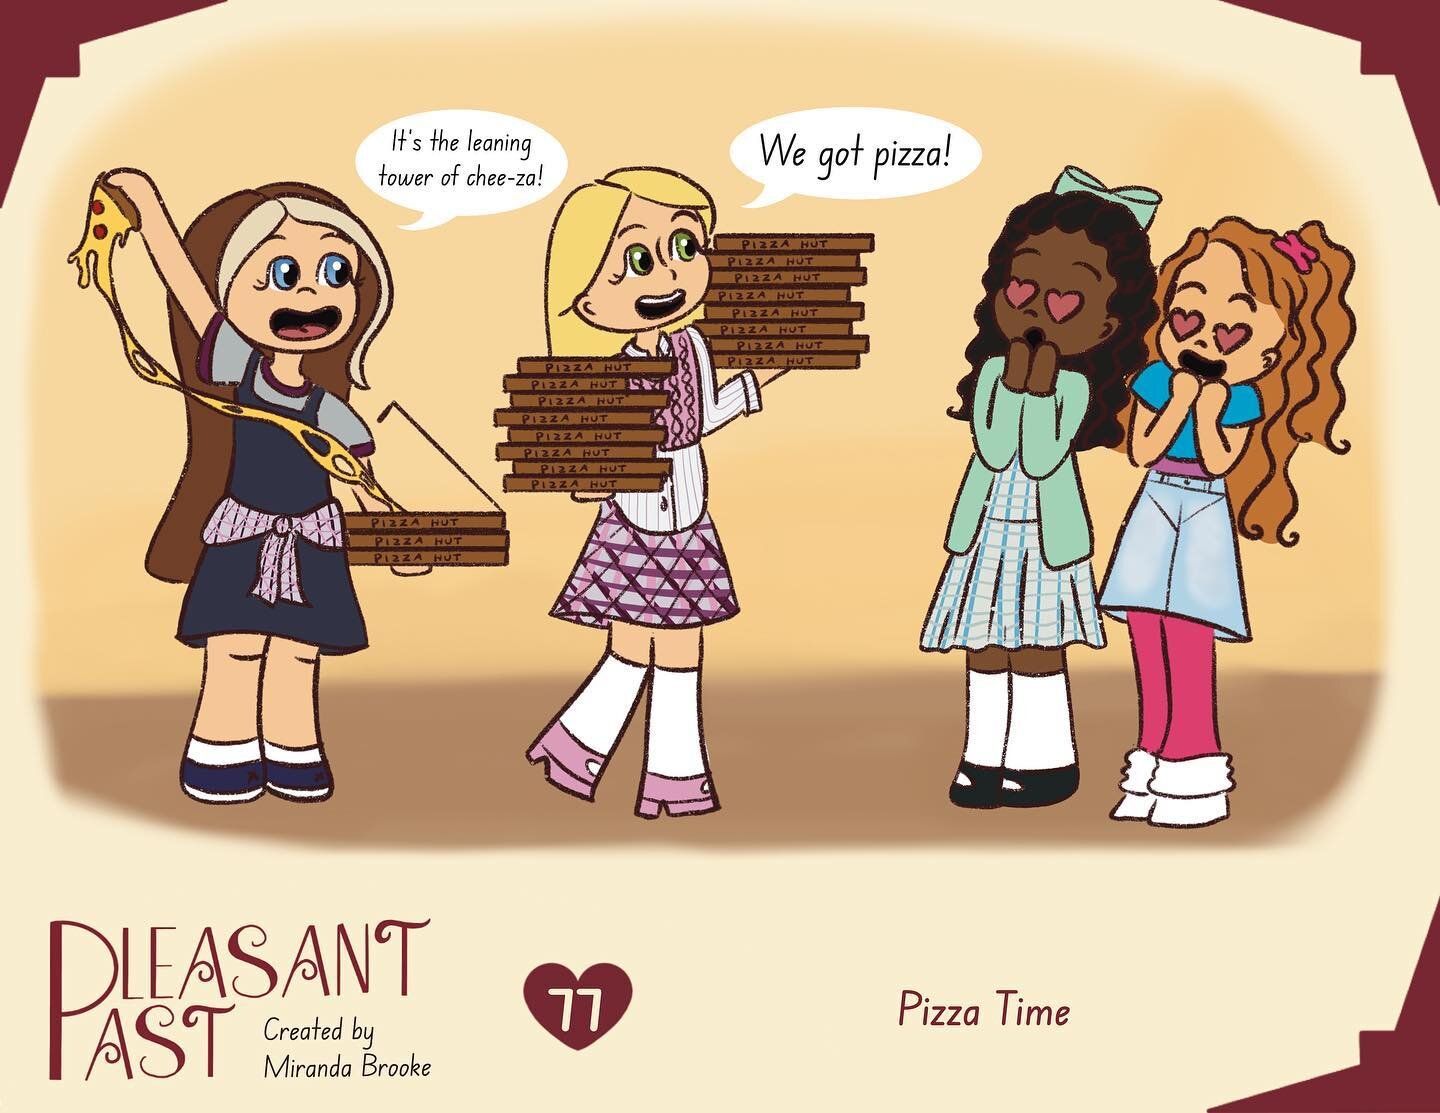 It is so crazy to think that during some of the American Girls doll lifetime, they would have never experienced pizza. It is so interesting how such common foods today weren&rsquo;t common before. Good thing in the Pleasant Past household, anything i